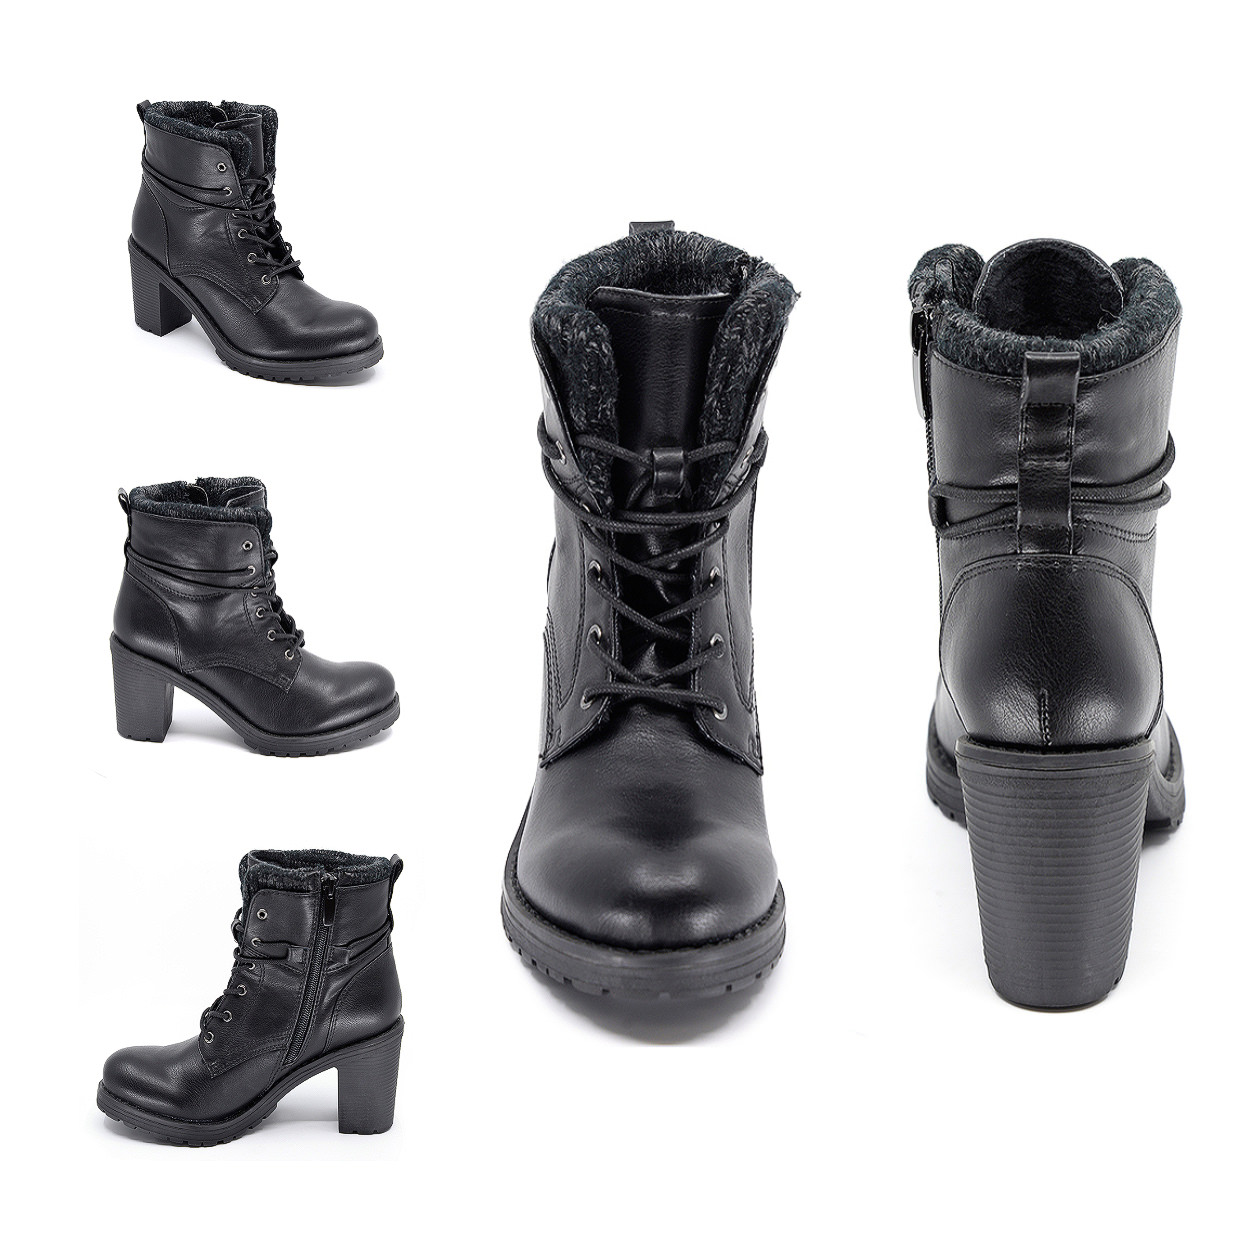 Silver Icing You Be The Buyer: Taxi Boots